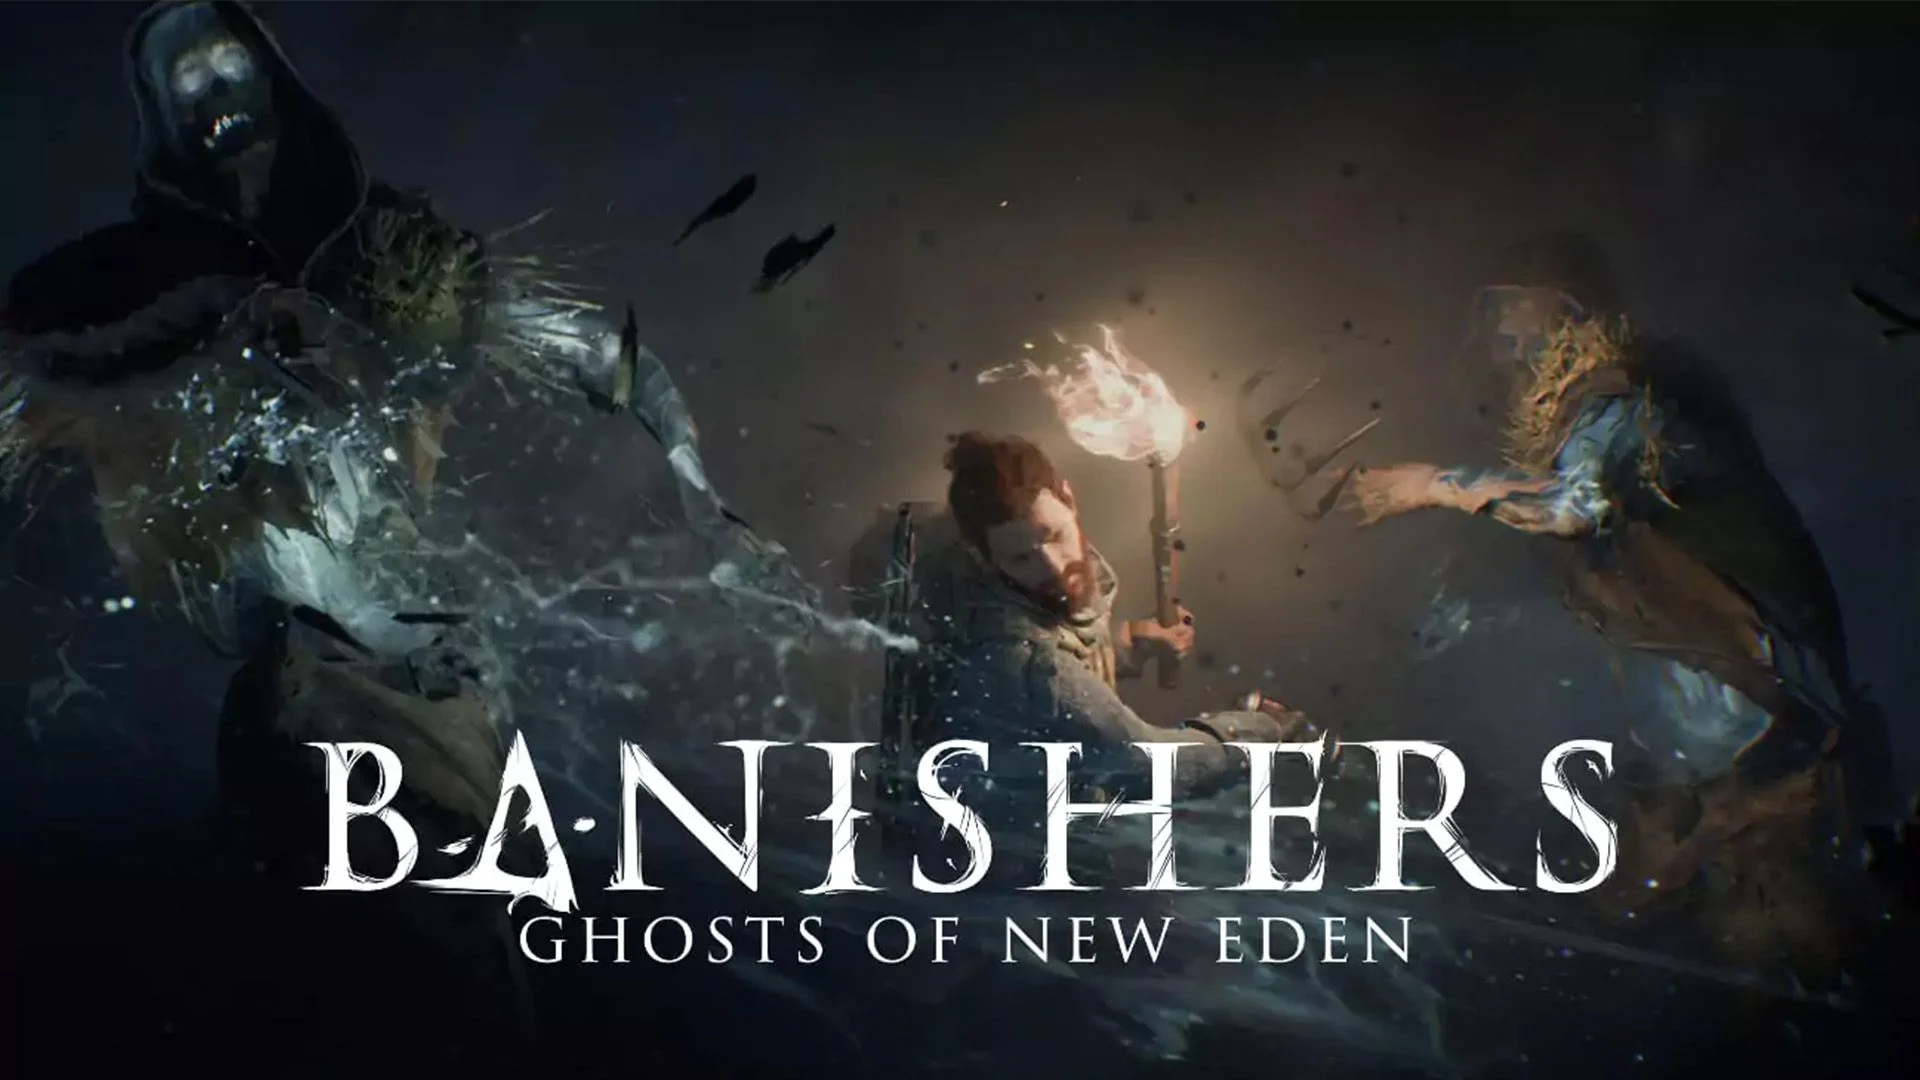 Banishers Ghosts Of New Eden